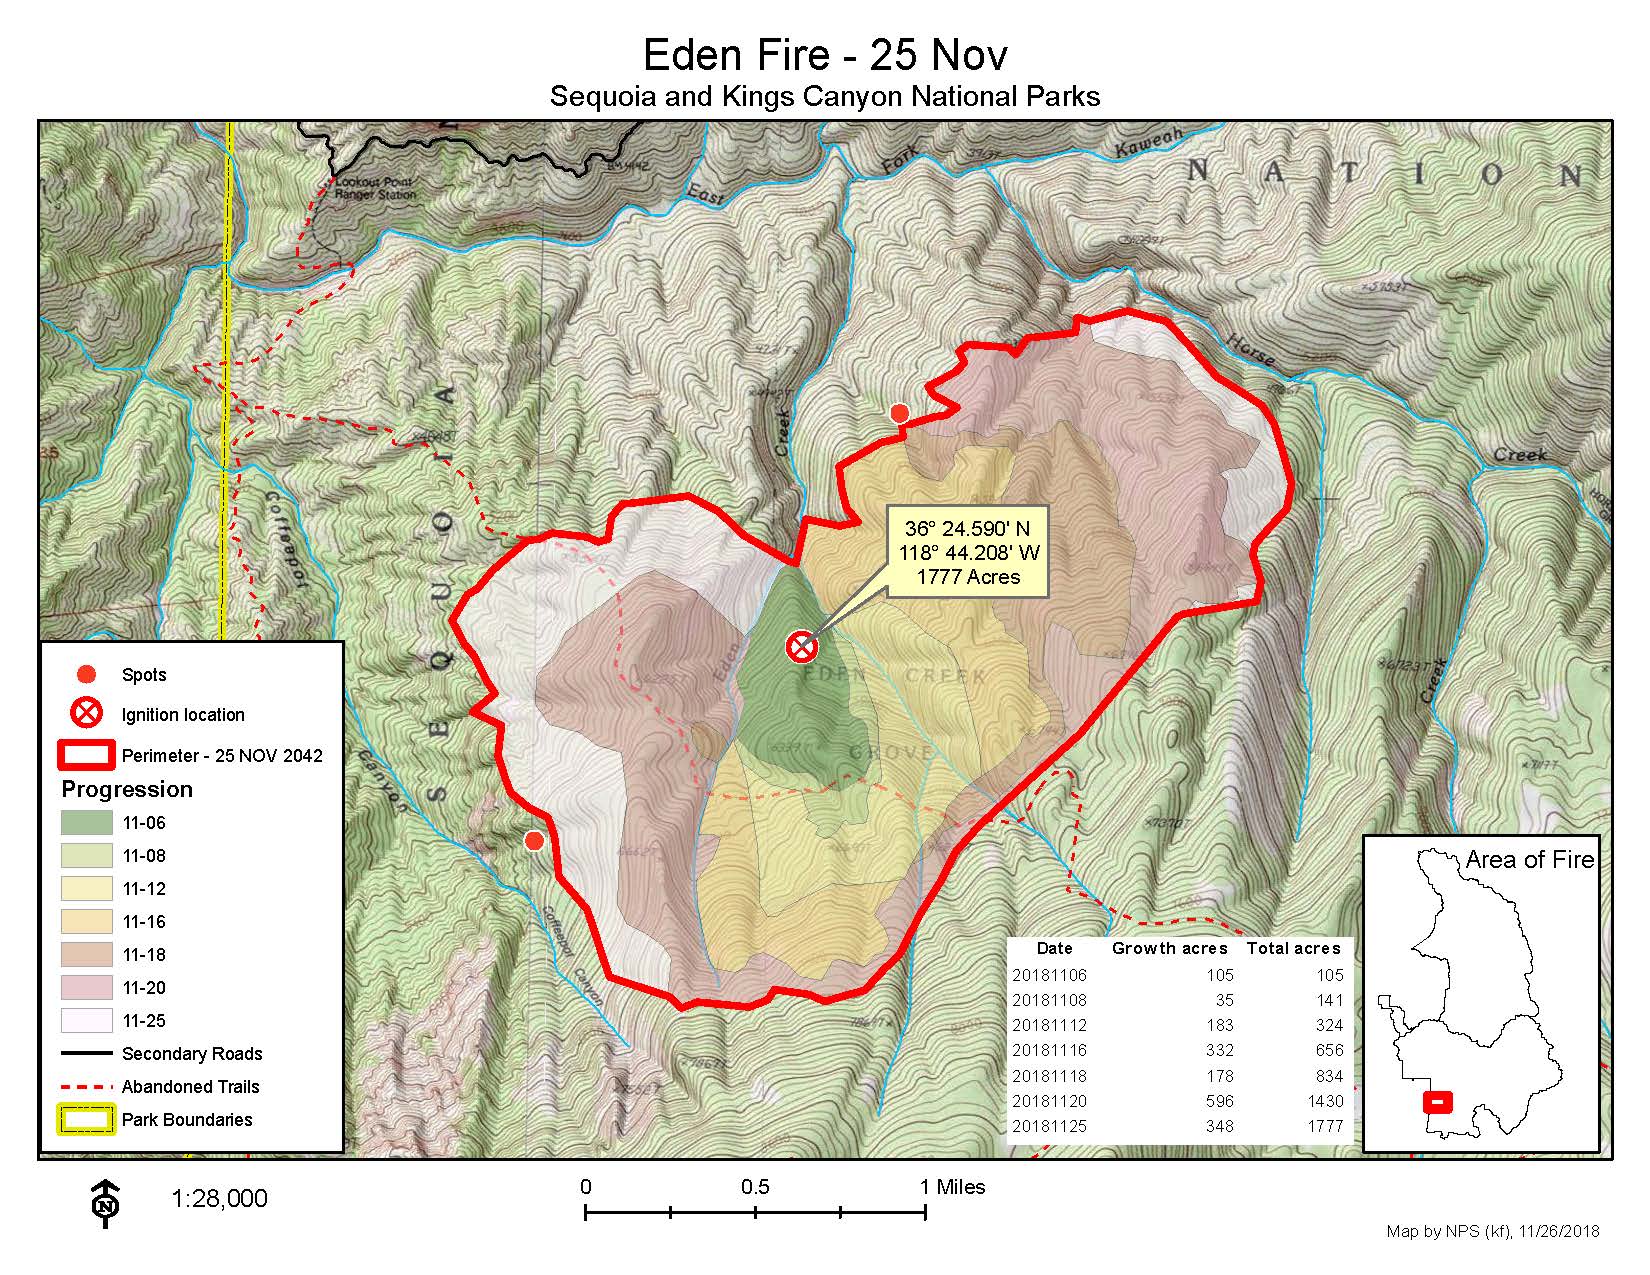 A map of the Eden Fire's progression shows how a wildfire can grow in different directions depending on weather and topography